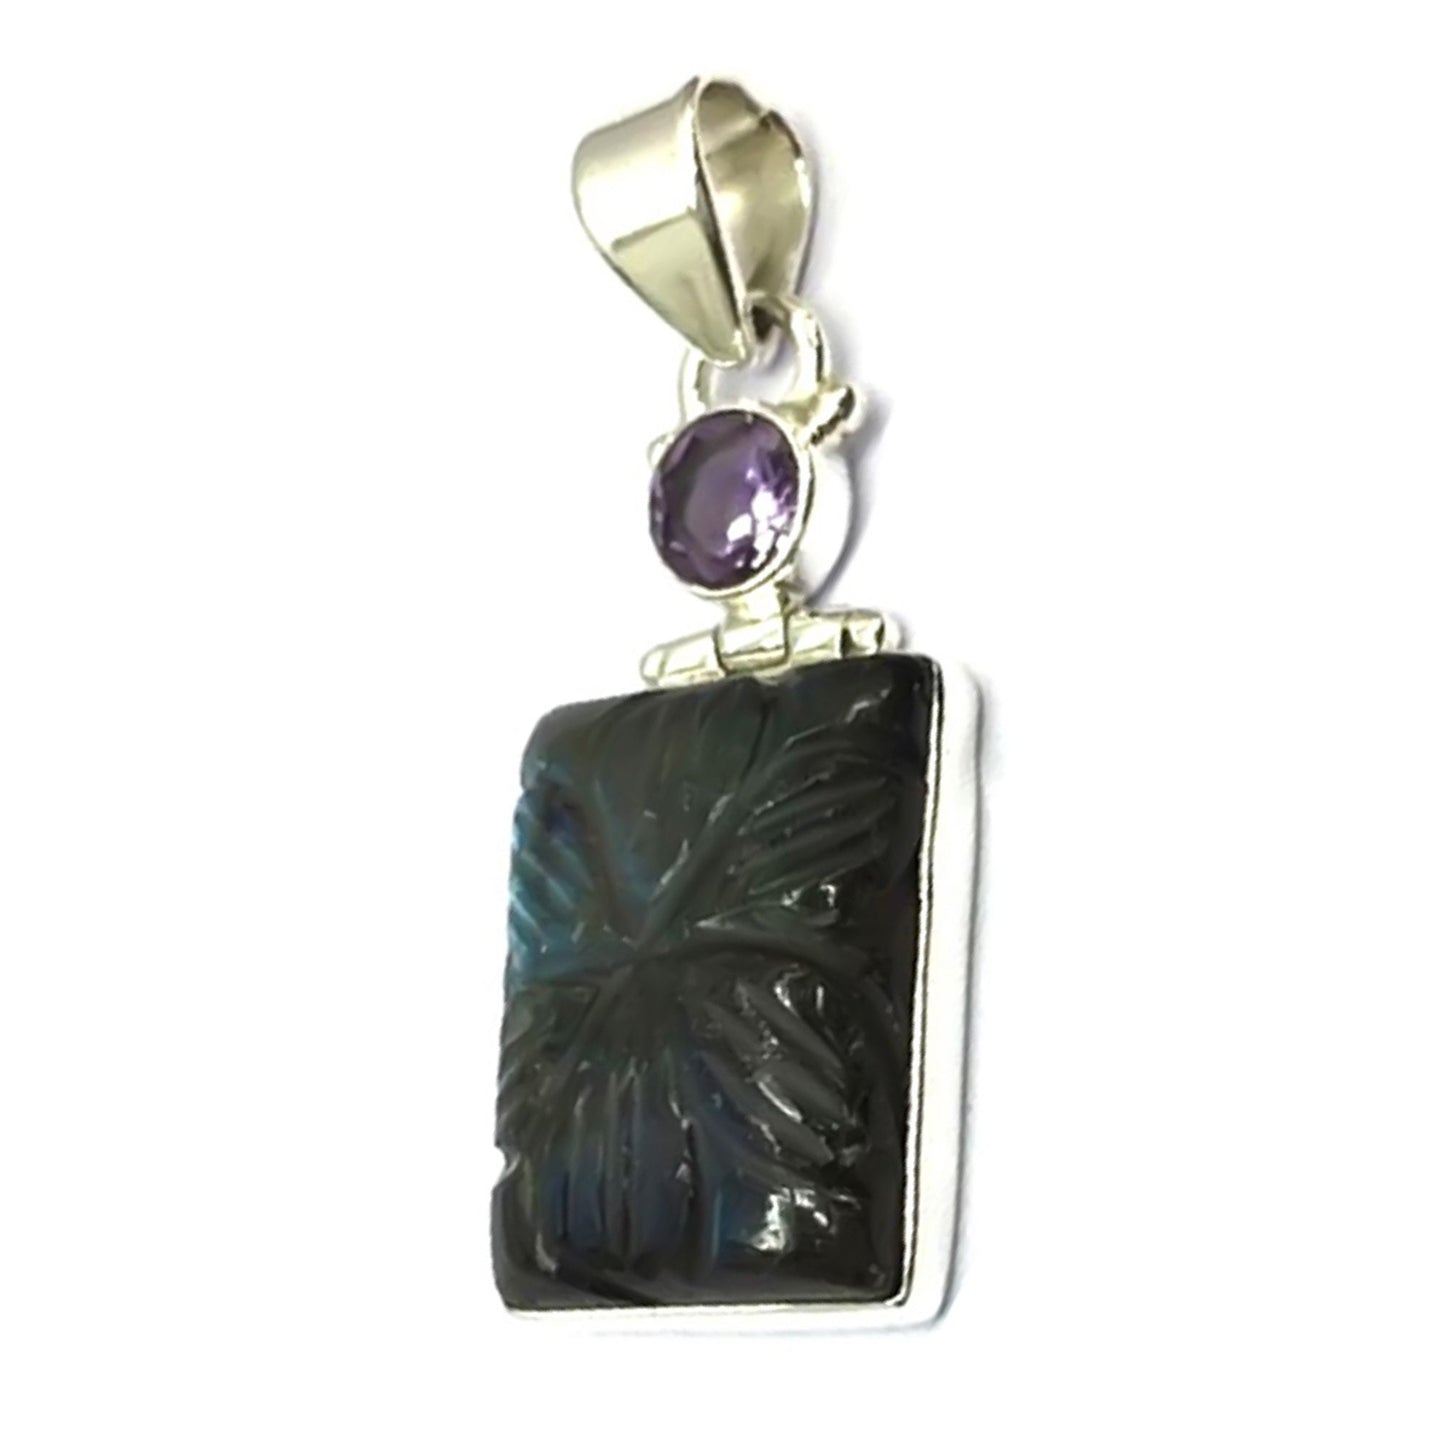 Natural Labradorite With Amethyst Gemstone Pendant, 925 Sterling Silver Pendant, Pendant For Women, Fine Jewelry, Gift For Her